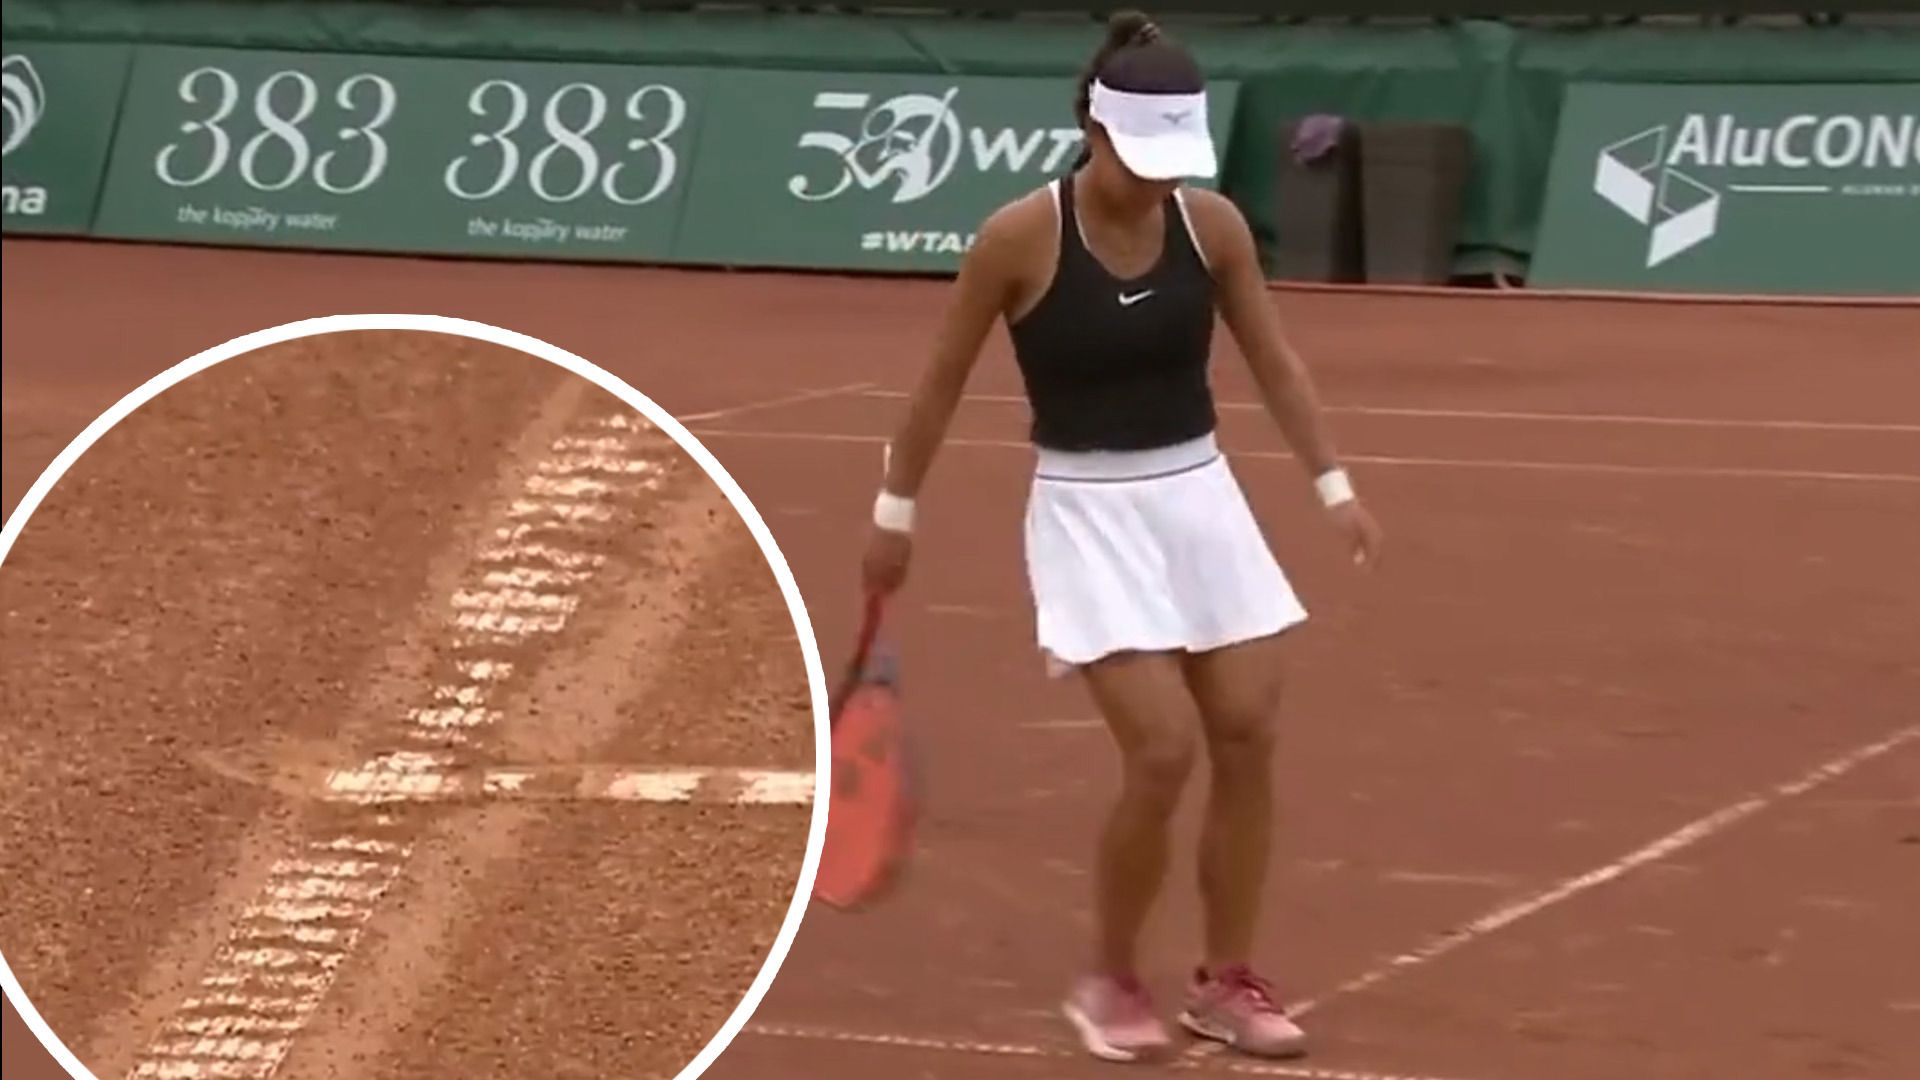 Amarissa Toth rubs out the mark where Shuai Zhang alleges her ball landed.